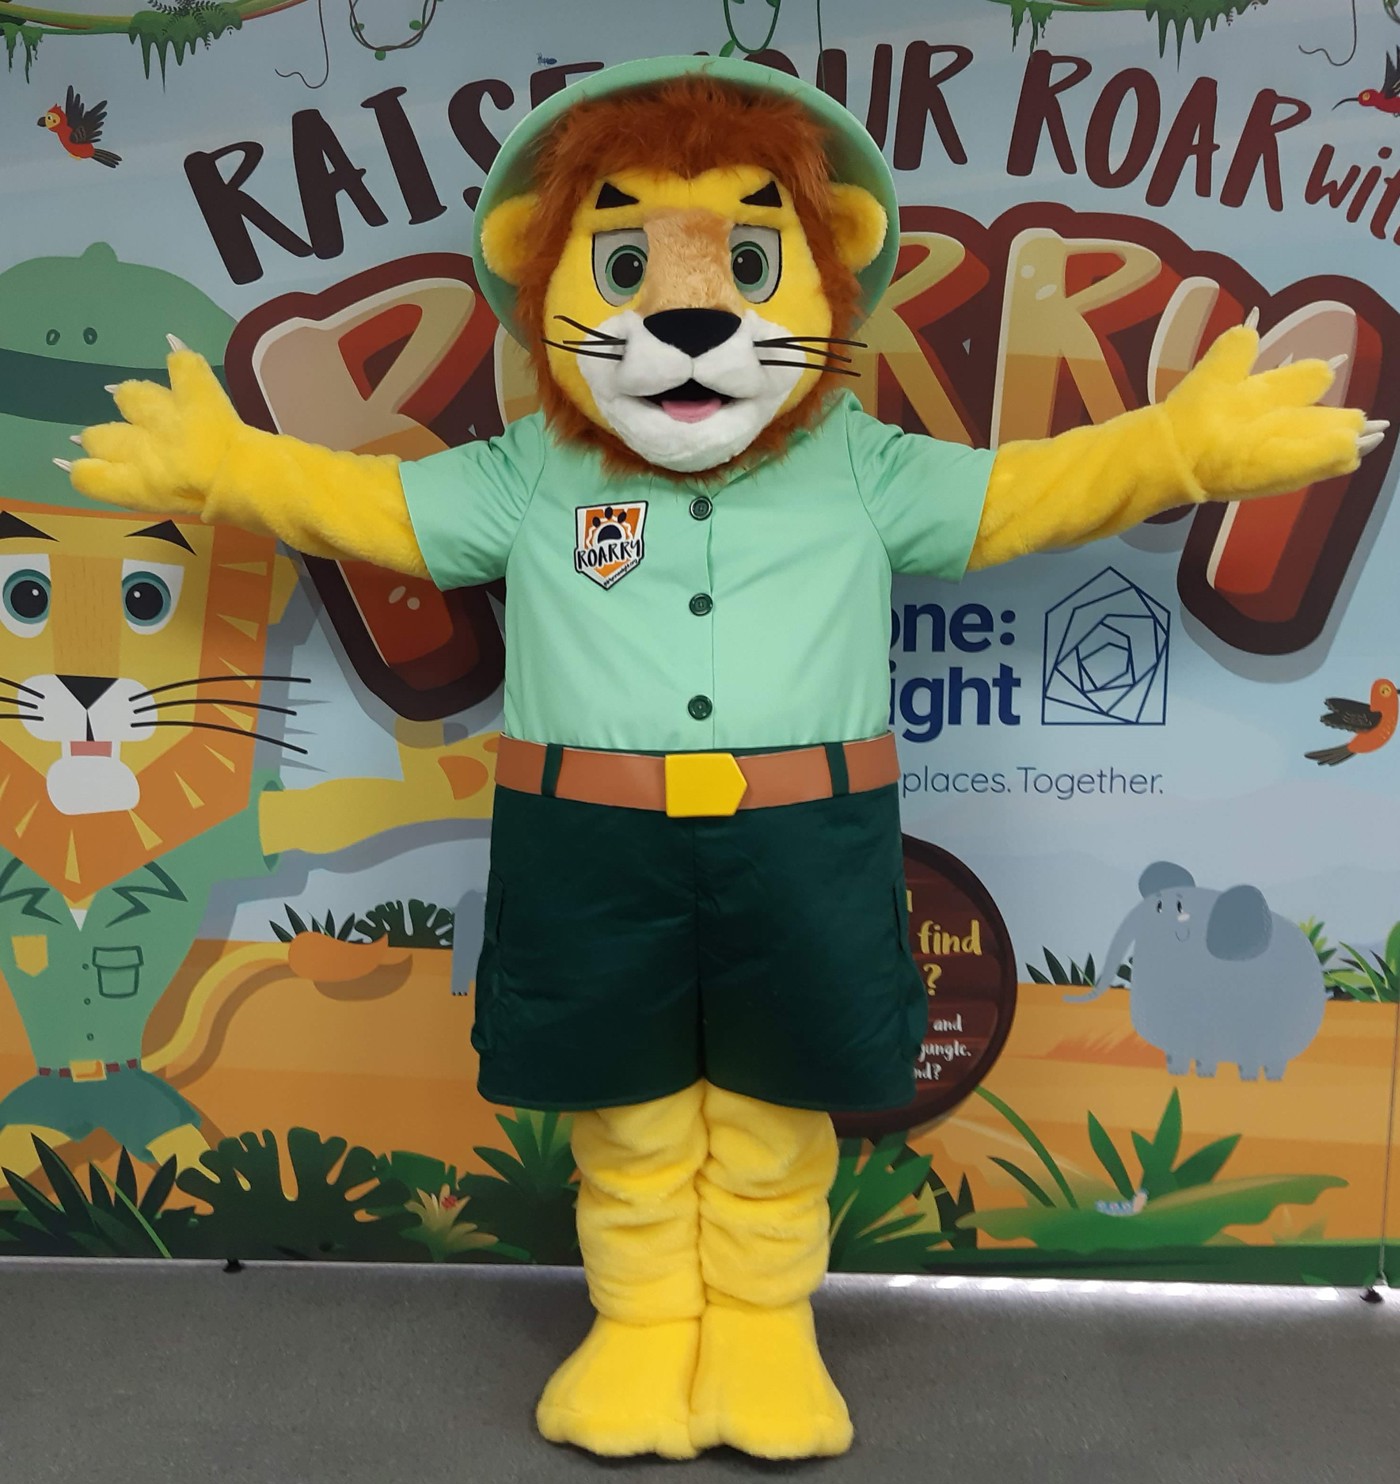 Raise you roar with Roarry the lion.